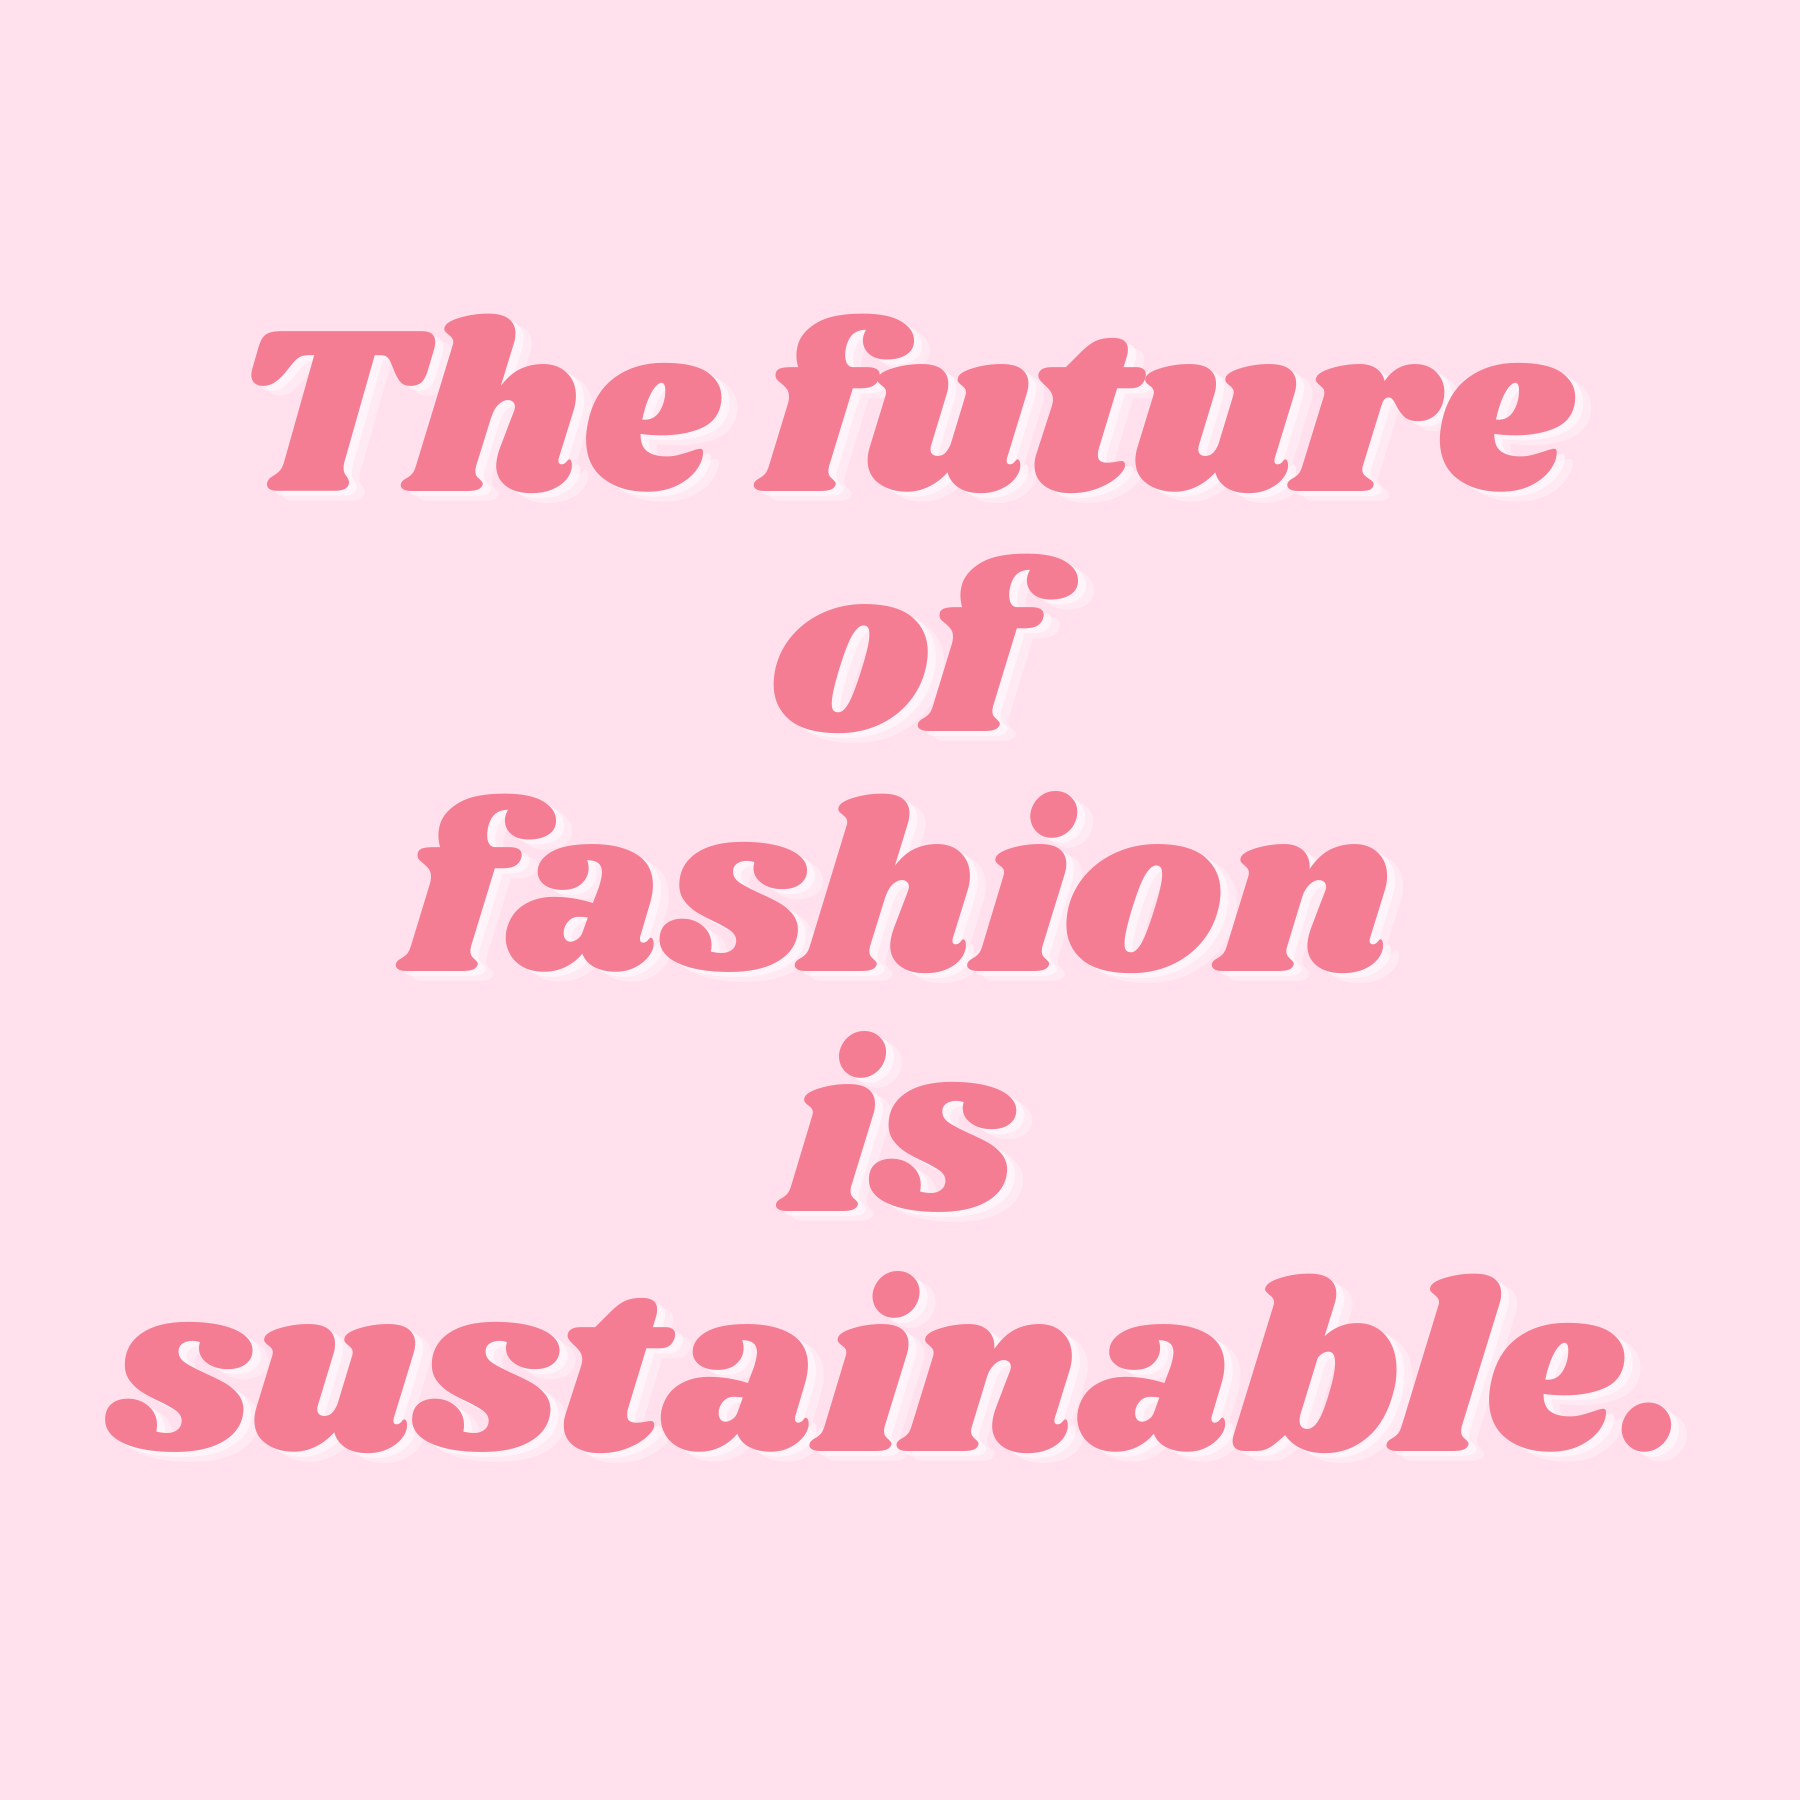 The Fashion Advocate ethical sustainable circular slow fashion brand business mentor online course marketing masterclass purpose profit business strategy 1